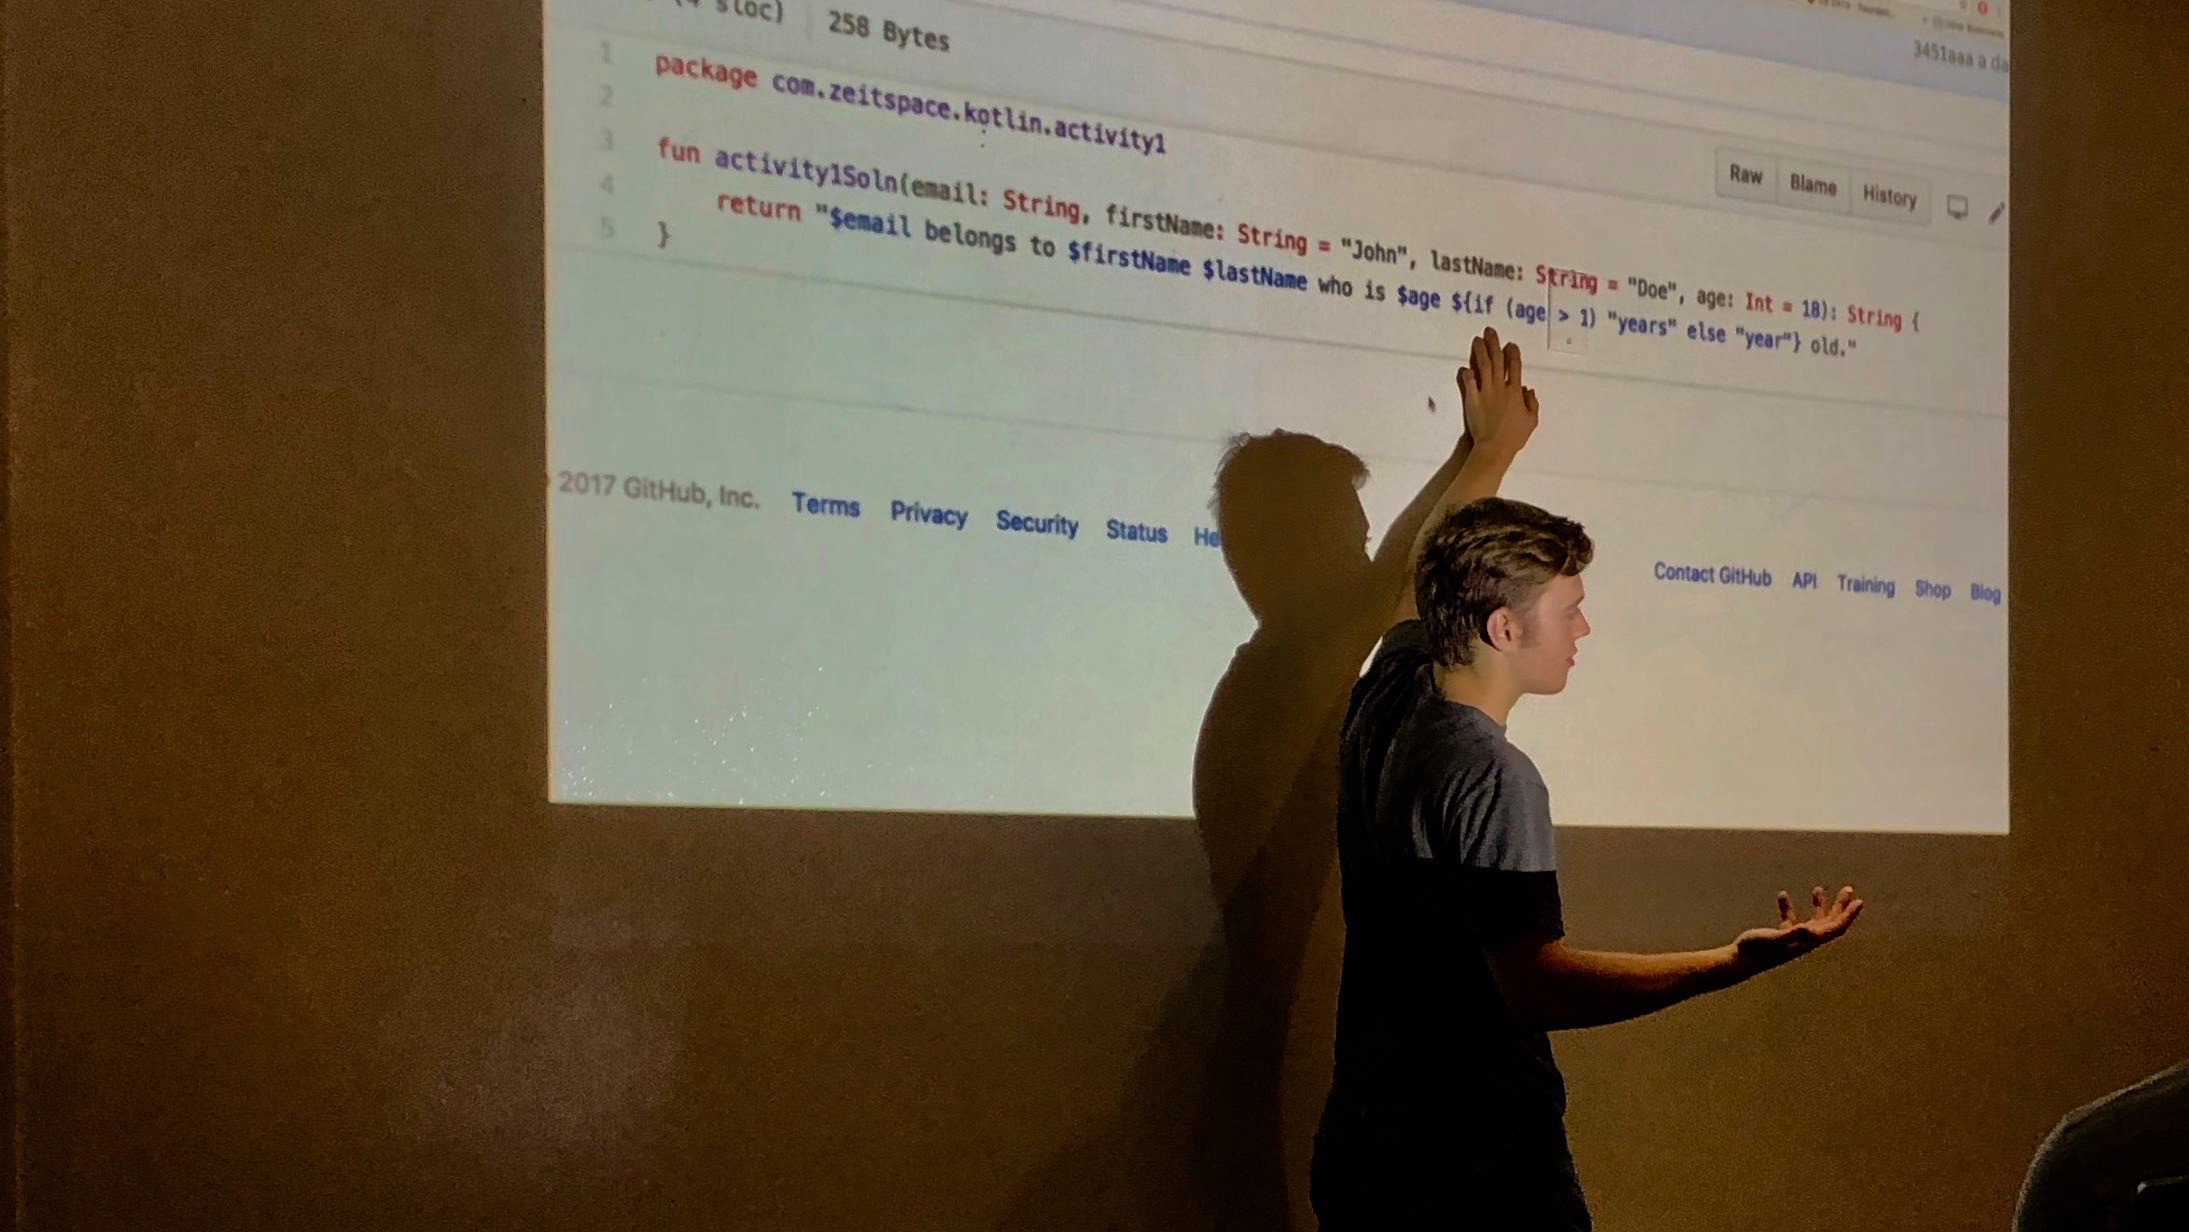 Kanoa Haley presenting Kotlin code at a Zeitspace Session